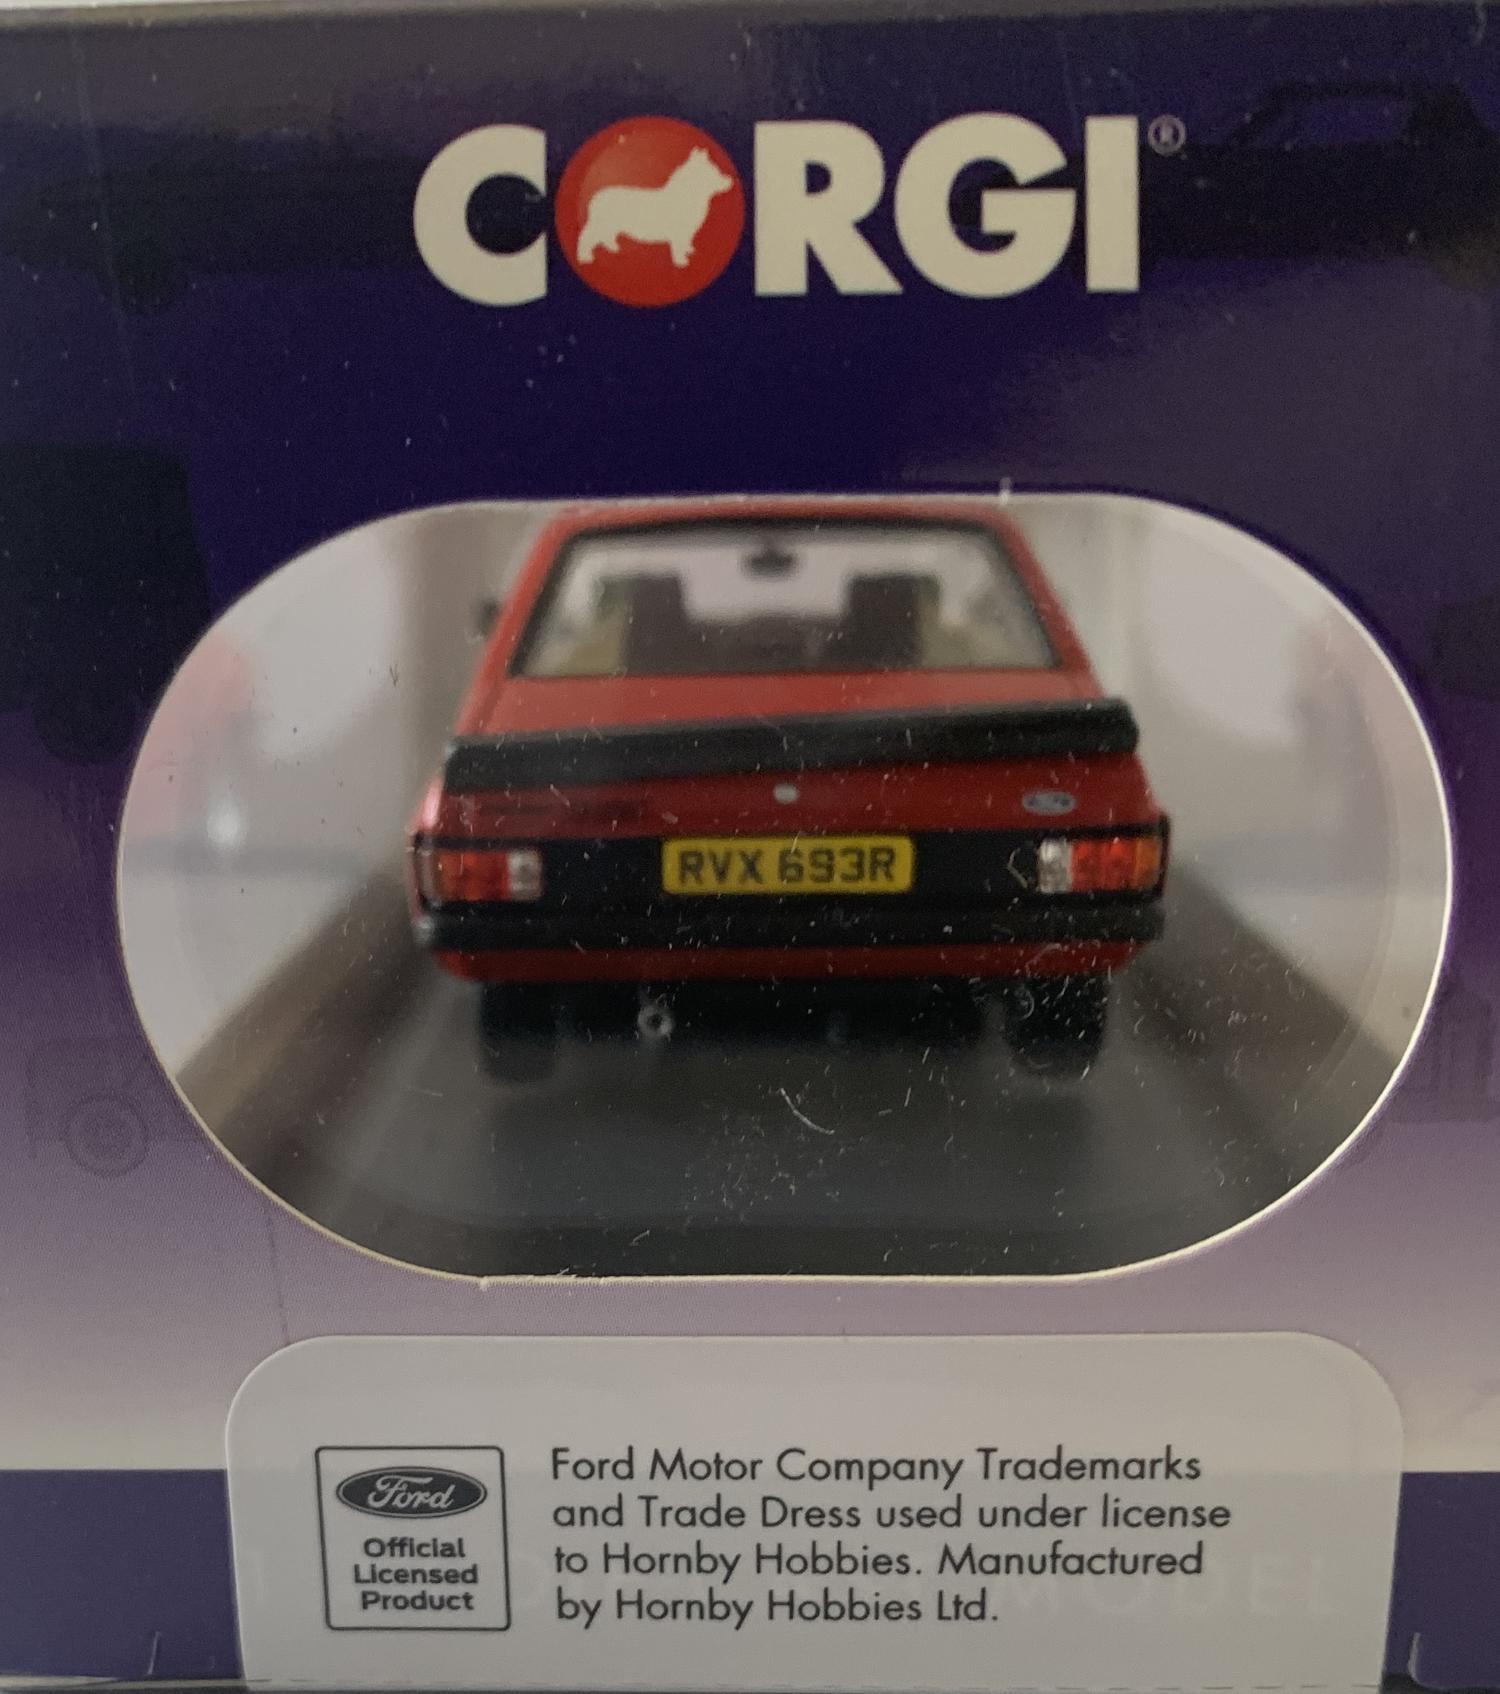 Ford Escort mk 2 RS2000 Series X (X-Pack) in venetian red, 1:43 scale model from Corgi Vanguards, limited edition model